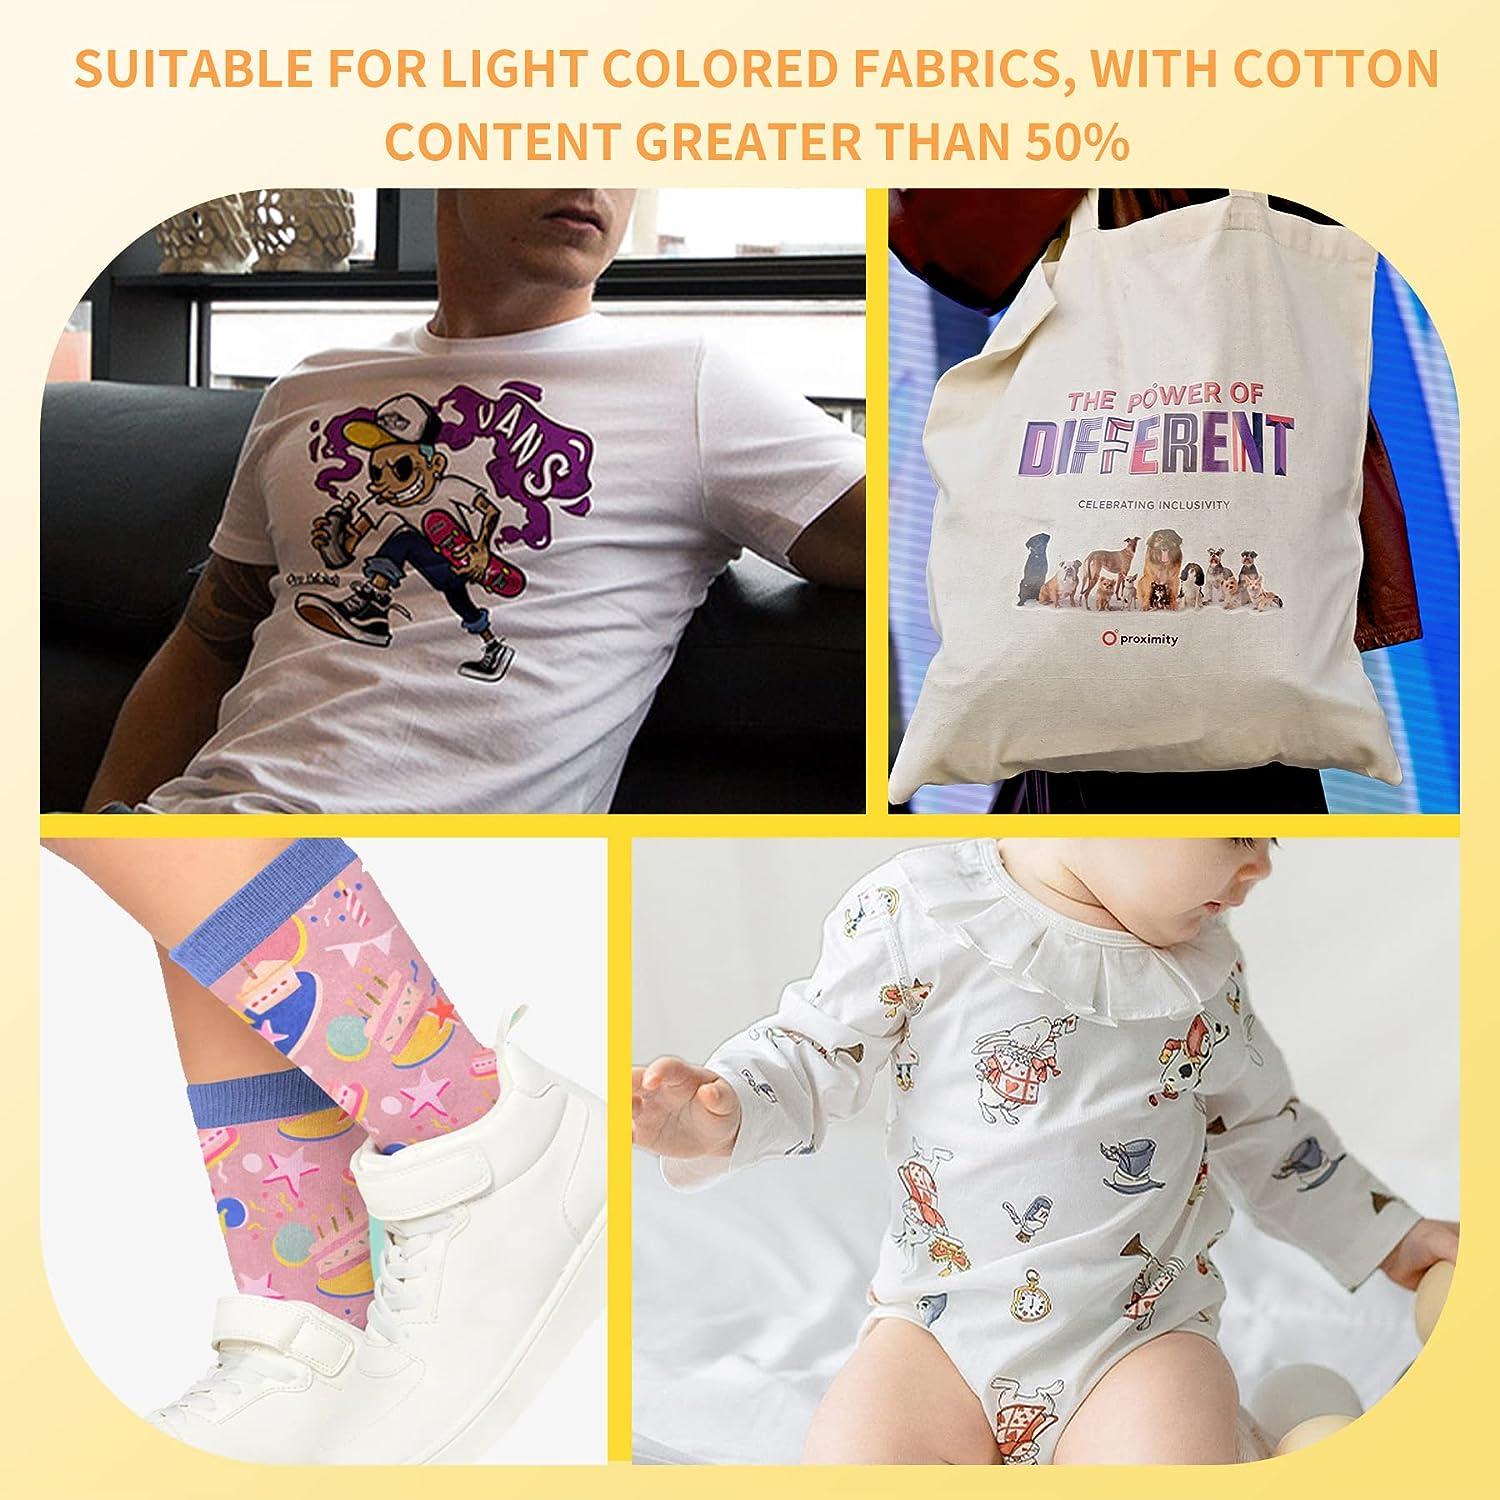 A-SUB Sublimation Paper 8.5x11 Inch 110 Sheets for Any Inkjet